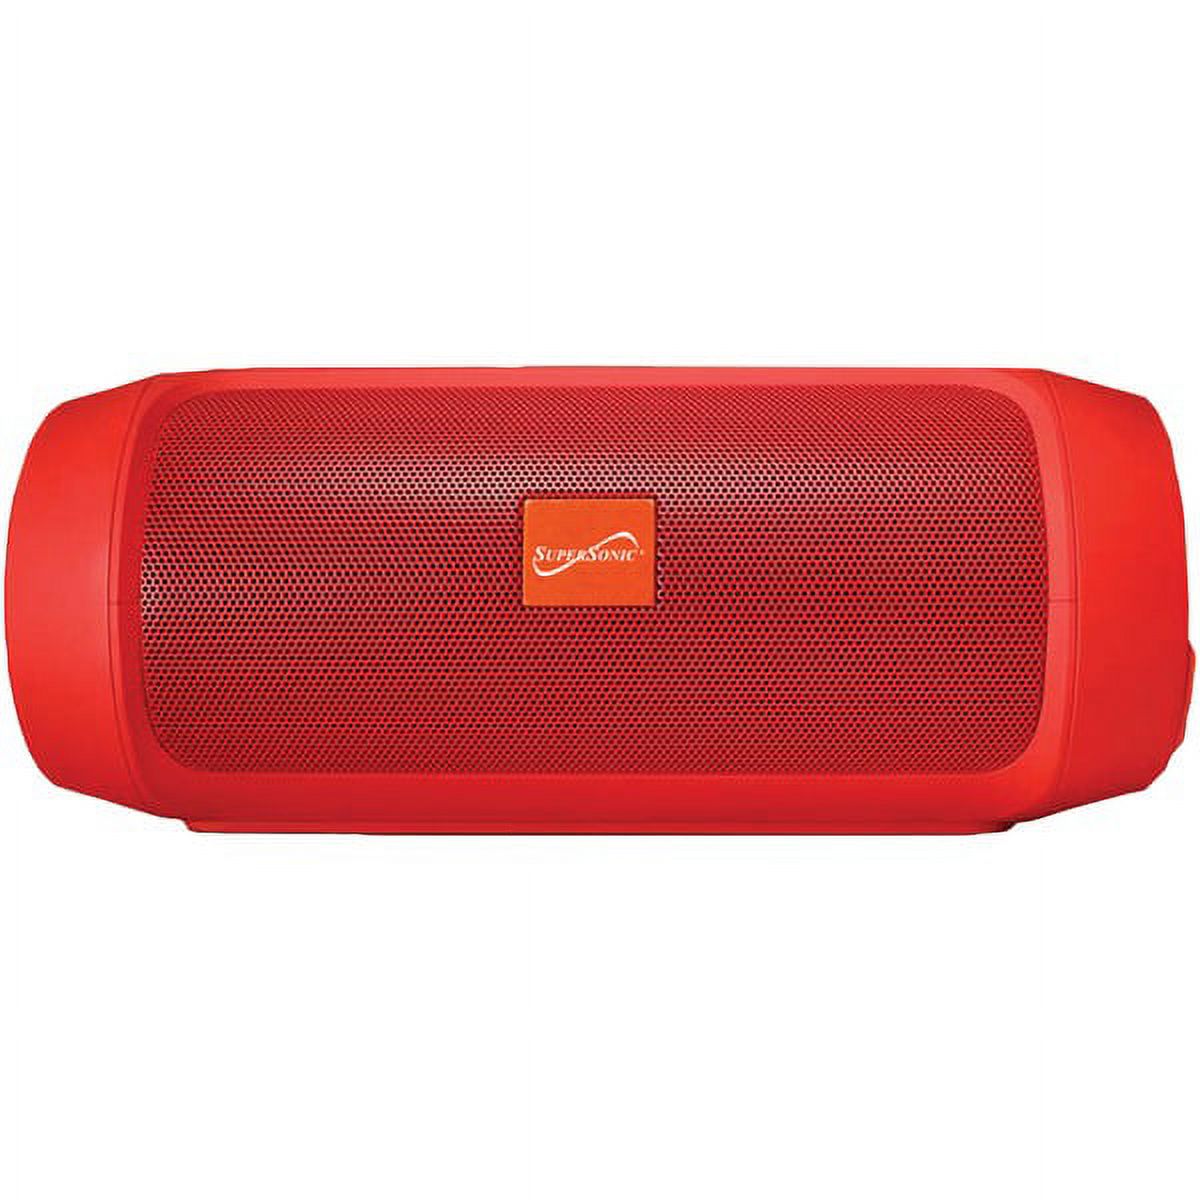 7-inch Portable (r) Reable Speaker (red) - image 1 of 1